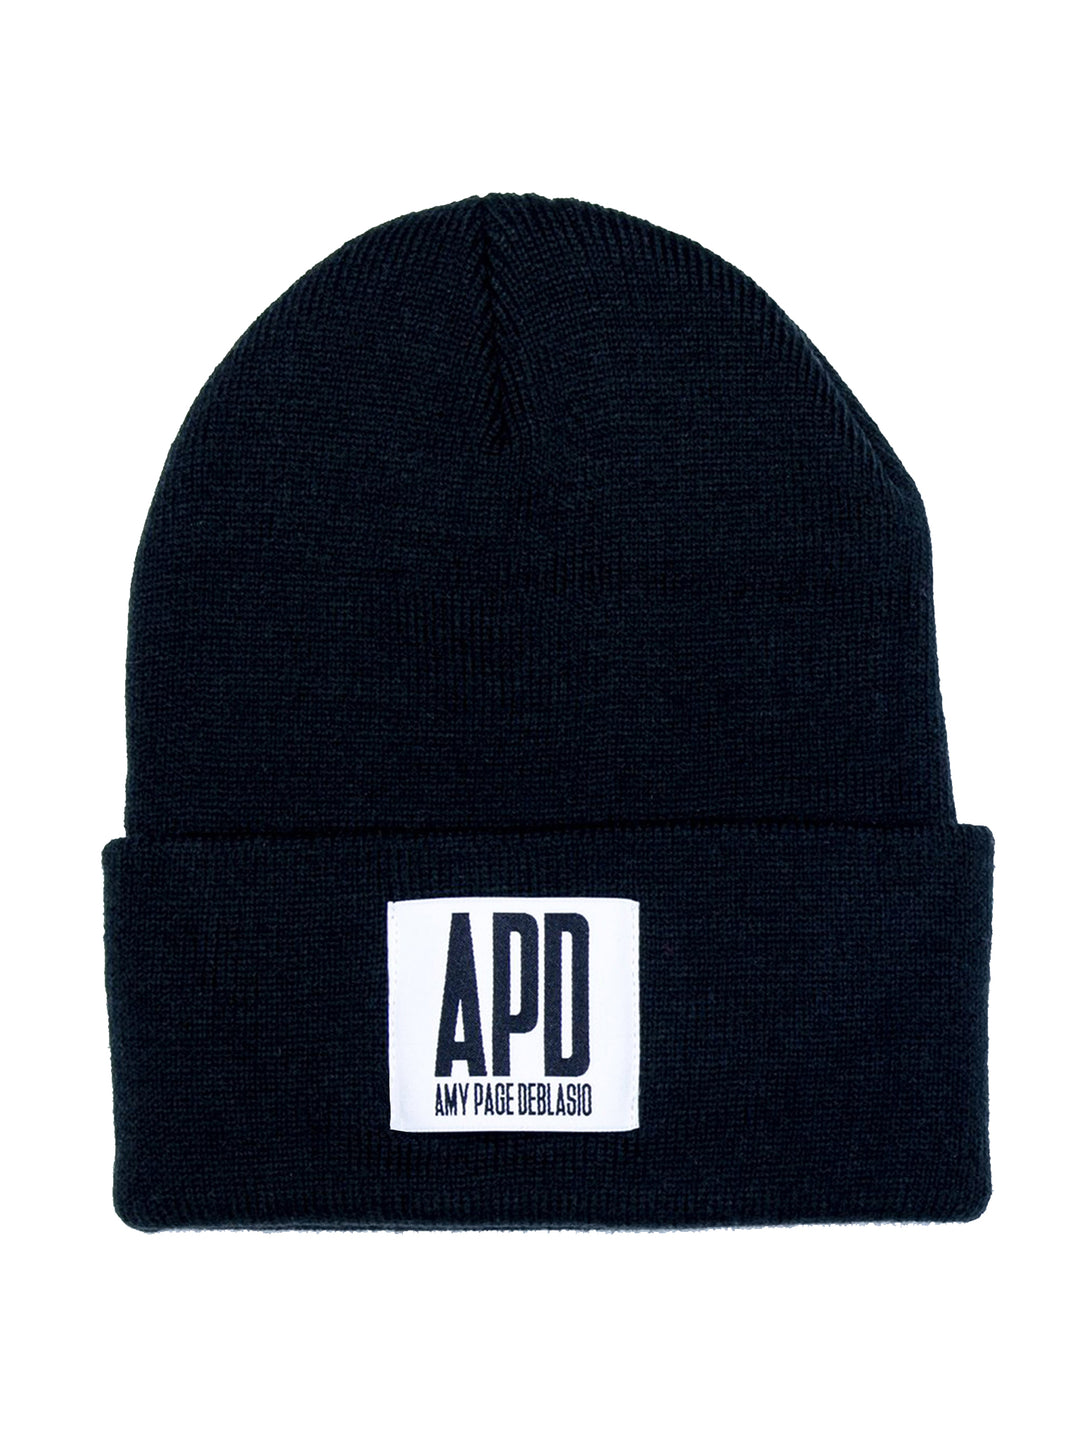 Beanie in Black with Logo Tag